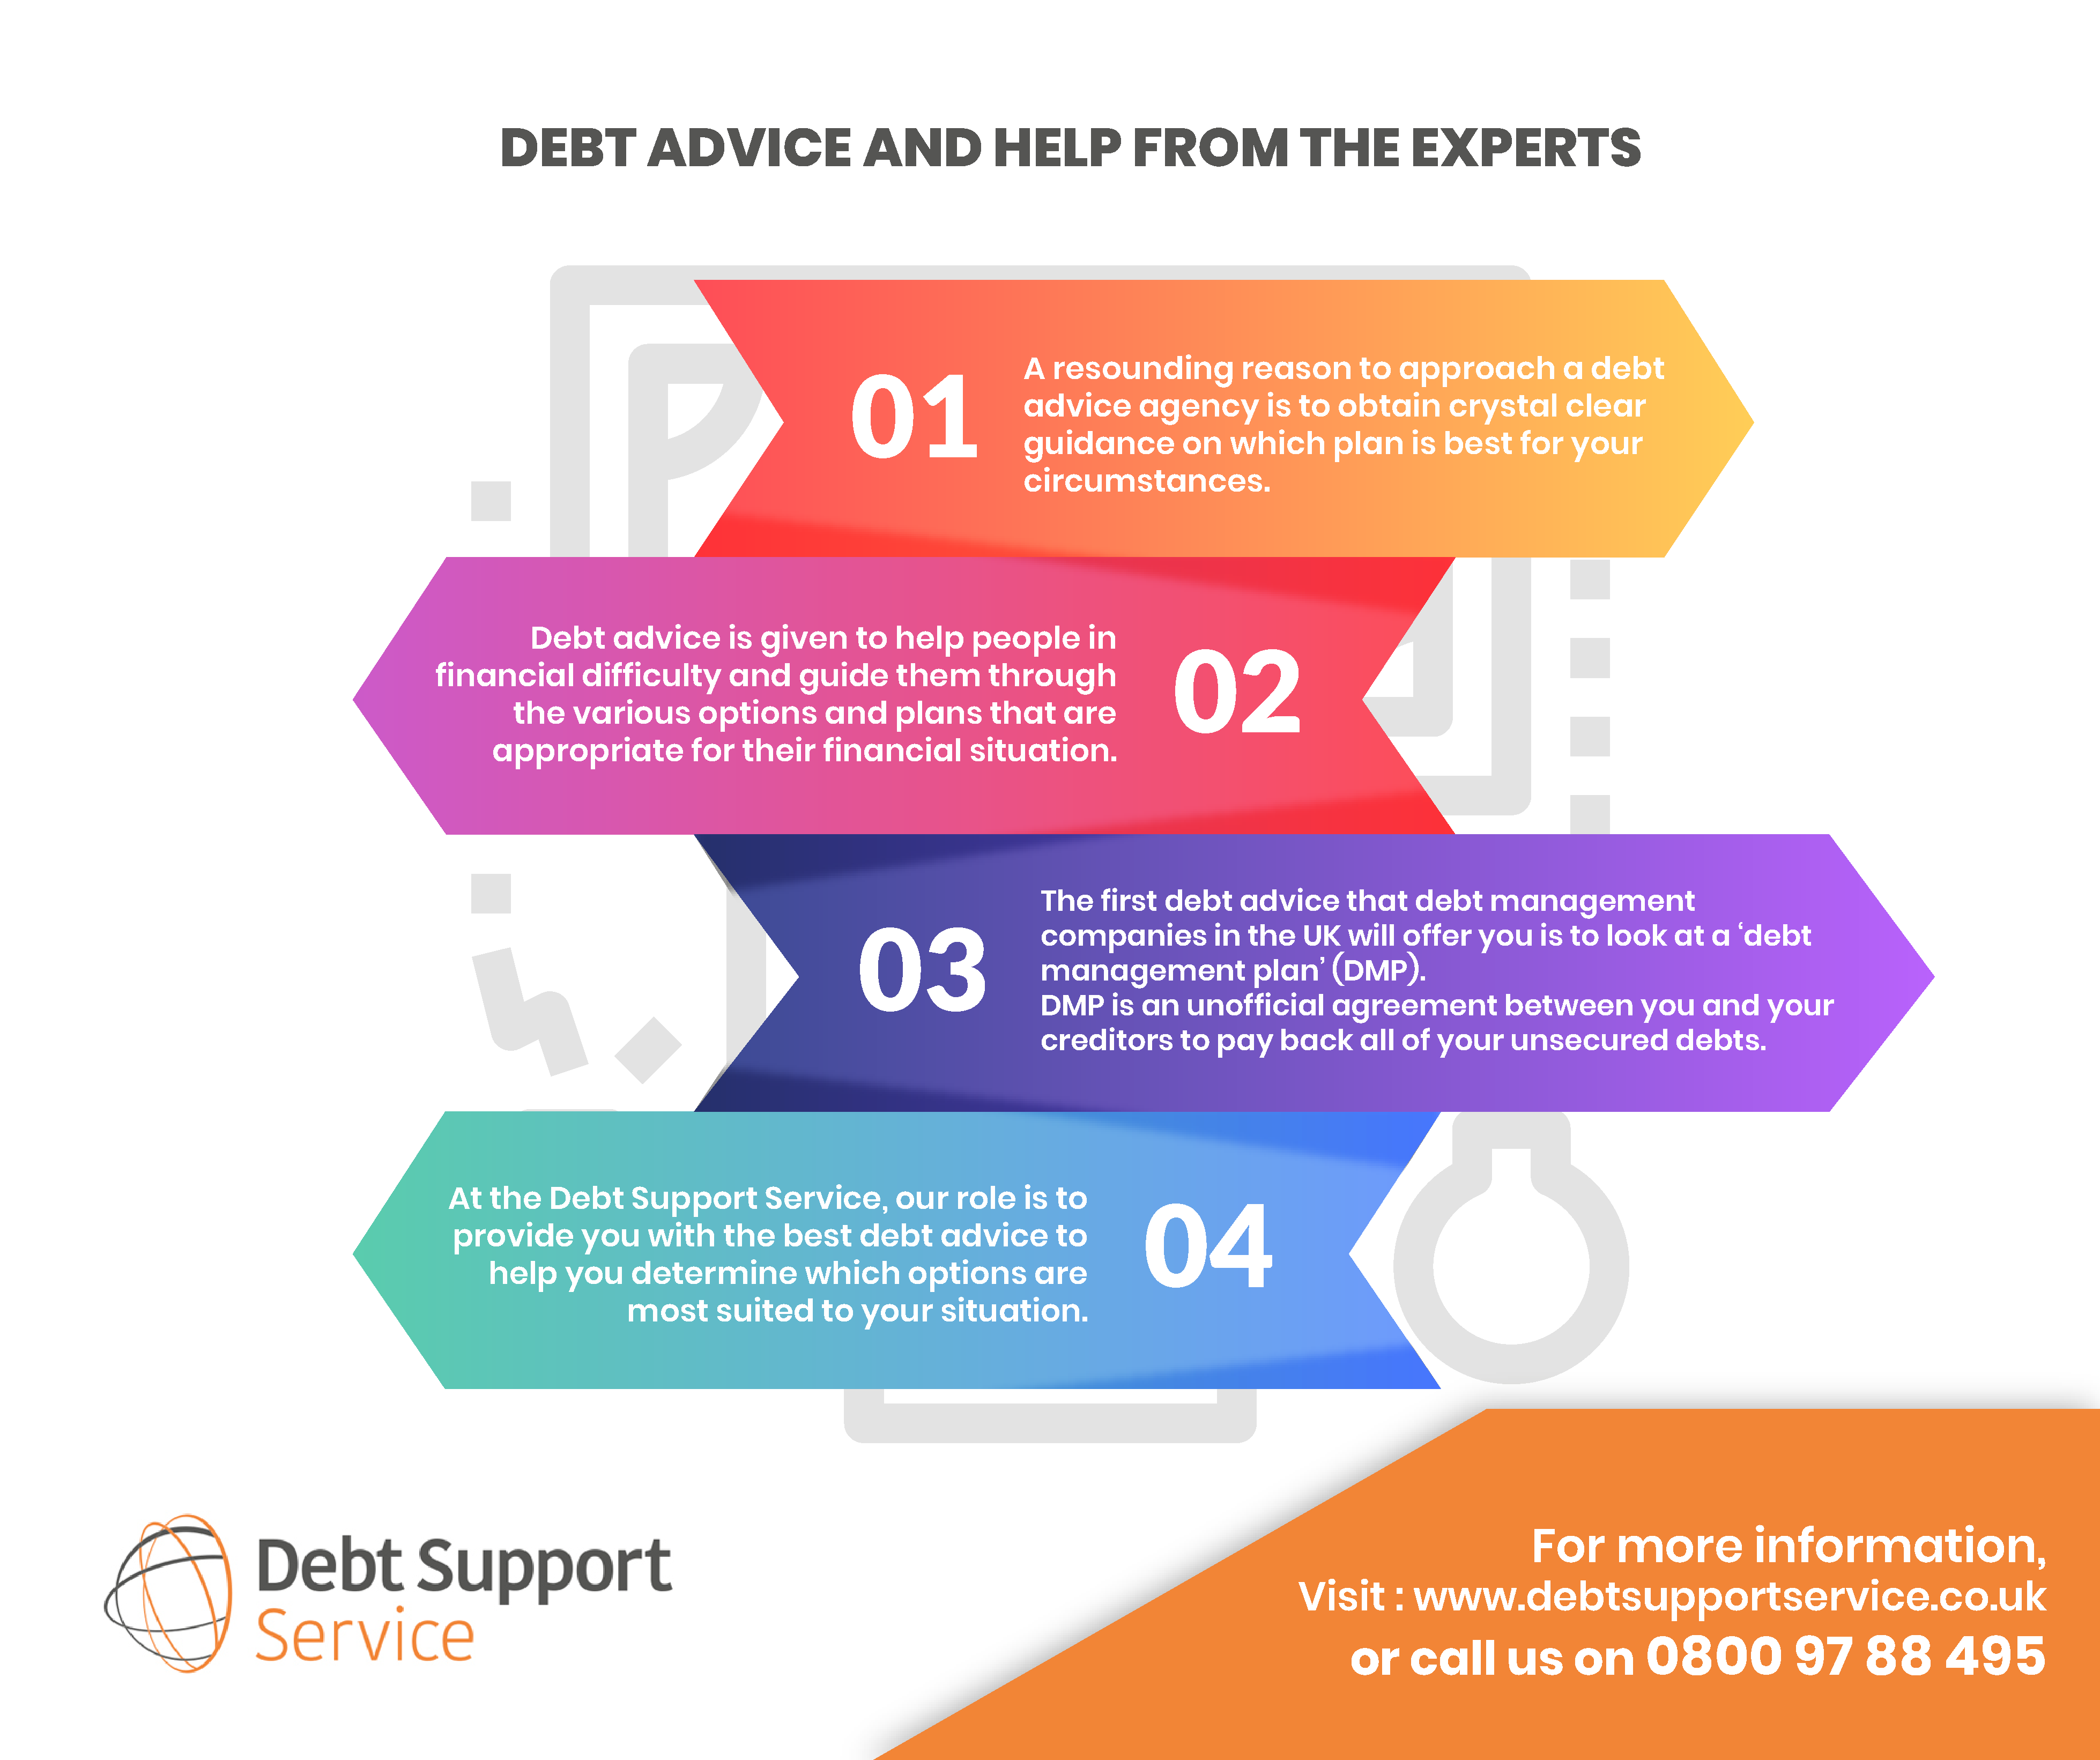 Debt advice and help from the experts - Debt Support Service